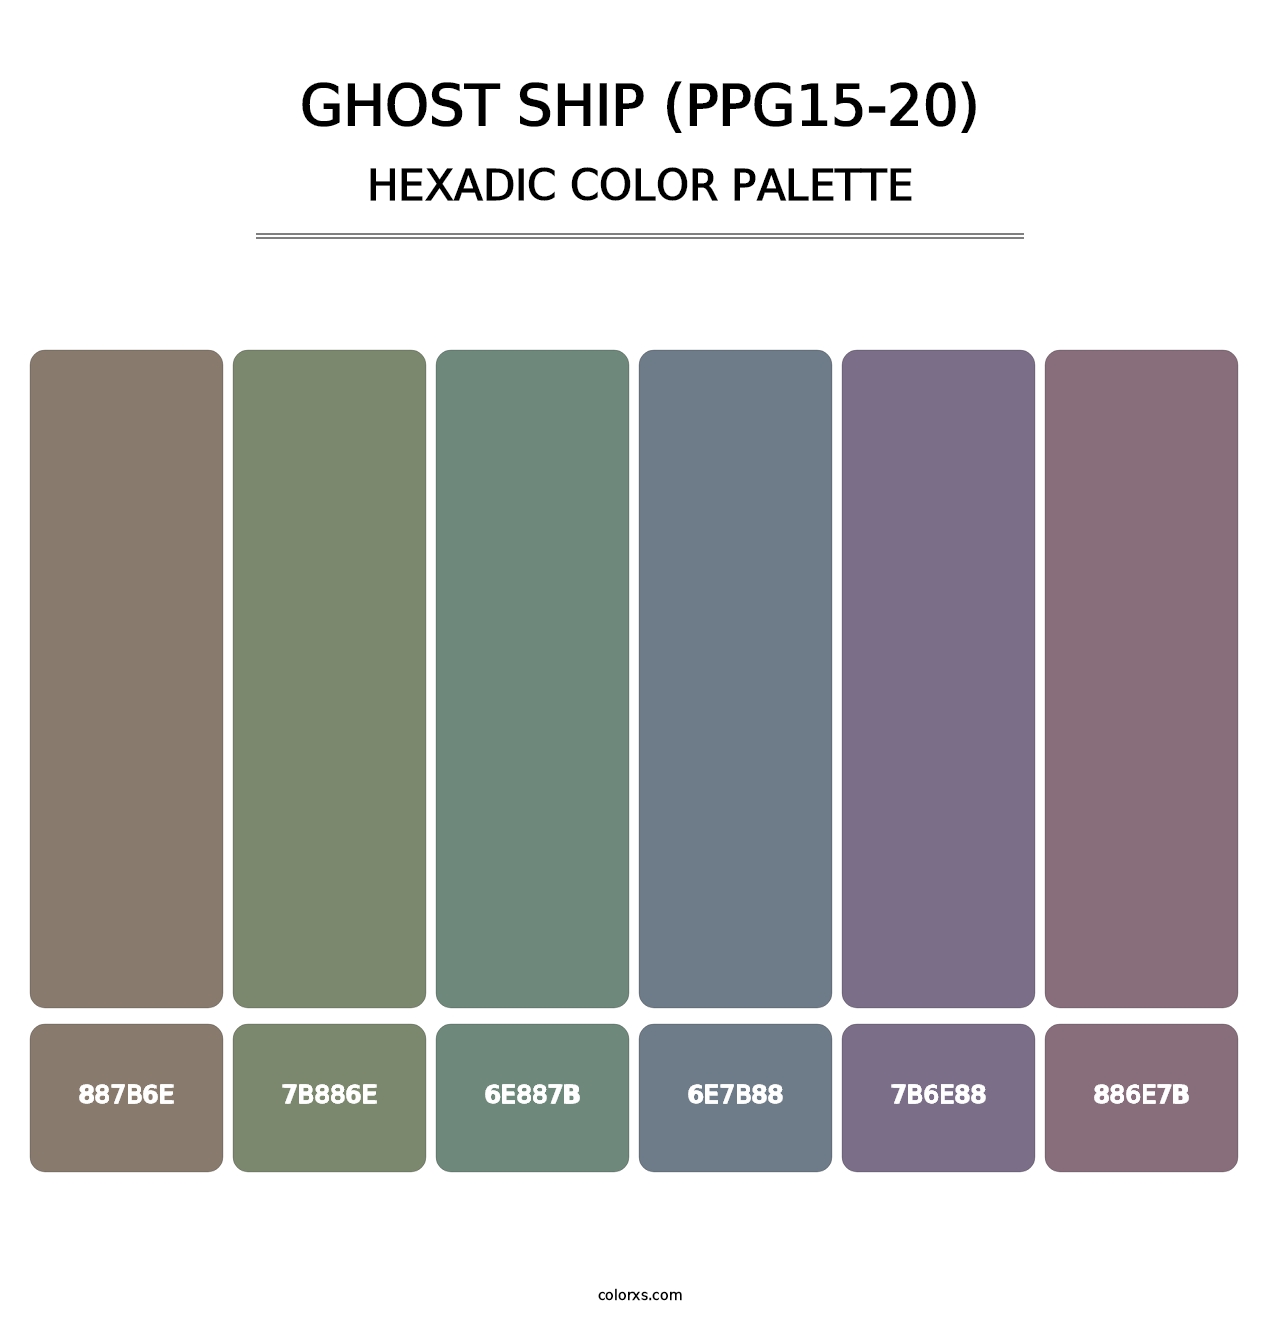 Ghost Ship (PPG15-20) - Hexadic Color Palette